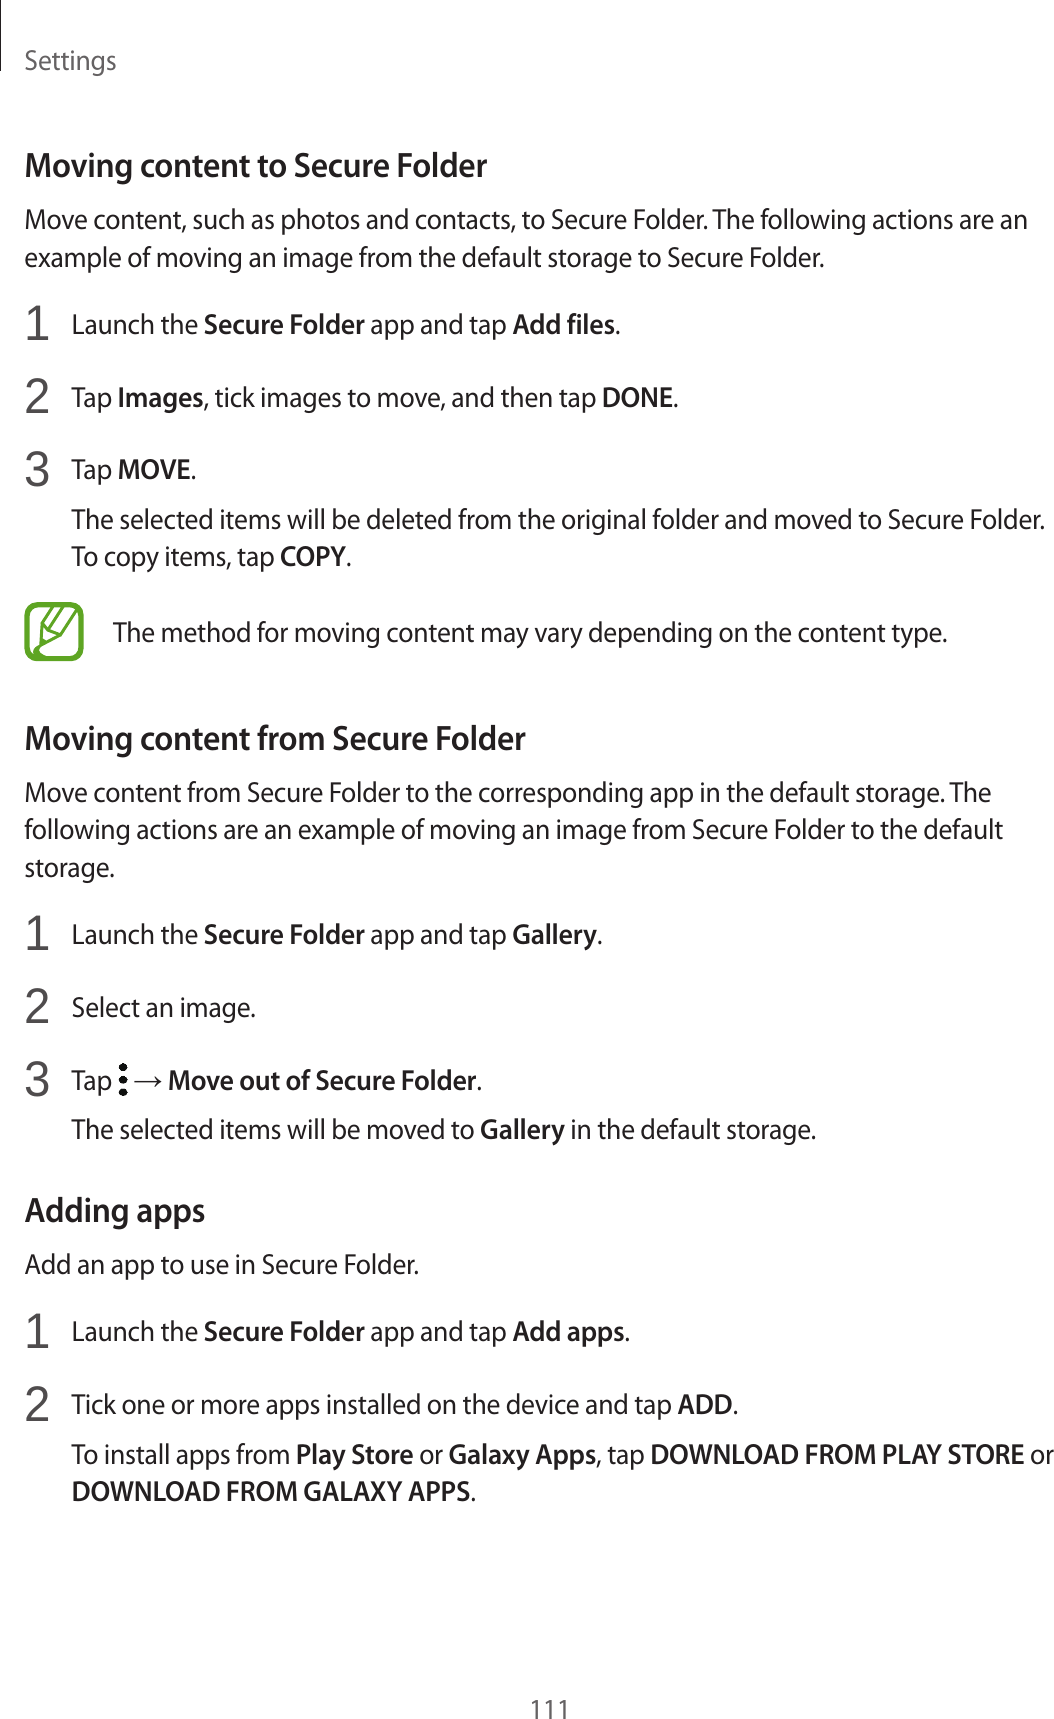 Settings111Moving content to Secure FolderMove content, such as photos and contacts, to Secure Folder. The following actions are an example of moving an image from the default storage to Secure Folder.1  Launch the Secure Folder app and tap Add files.2  Tap Images, tick images to move, and then tap DONE.3  Tap MOVE.The selected items will be deleted from the original folder and moved to Secure Folder. To copy items, tap COPY.The method for moving content may vary depending on the content type.Moving content from Secure FolderMove content from Secure Folder to the corresponding app in the default storage. The following actions are an example of moving an image from Secure Folder to the default storage.1  Launch the Secure Folder app and tap Gallery.2  Select an image.3  Tap   → Move out of Secure Folder.The selected items will be moved to Gallery in the default storage.Adding appsAdd an app to use in Secure Folder.1  Launch the Secure Folder app and tap Add apps.2  Tick one or more apps installed on the device and tap ADD.To install apps from Play Store or Galaxy Apps, tap DOWNLOAD FROM PLAY STORE or DOWNLOAD FROM GALAXY APPS.